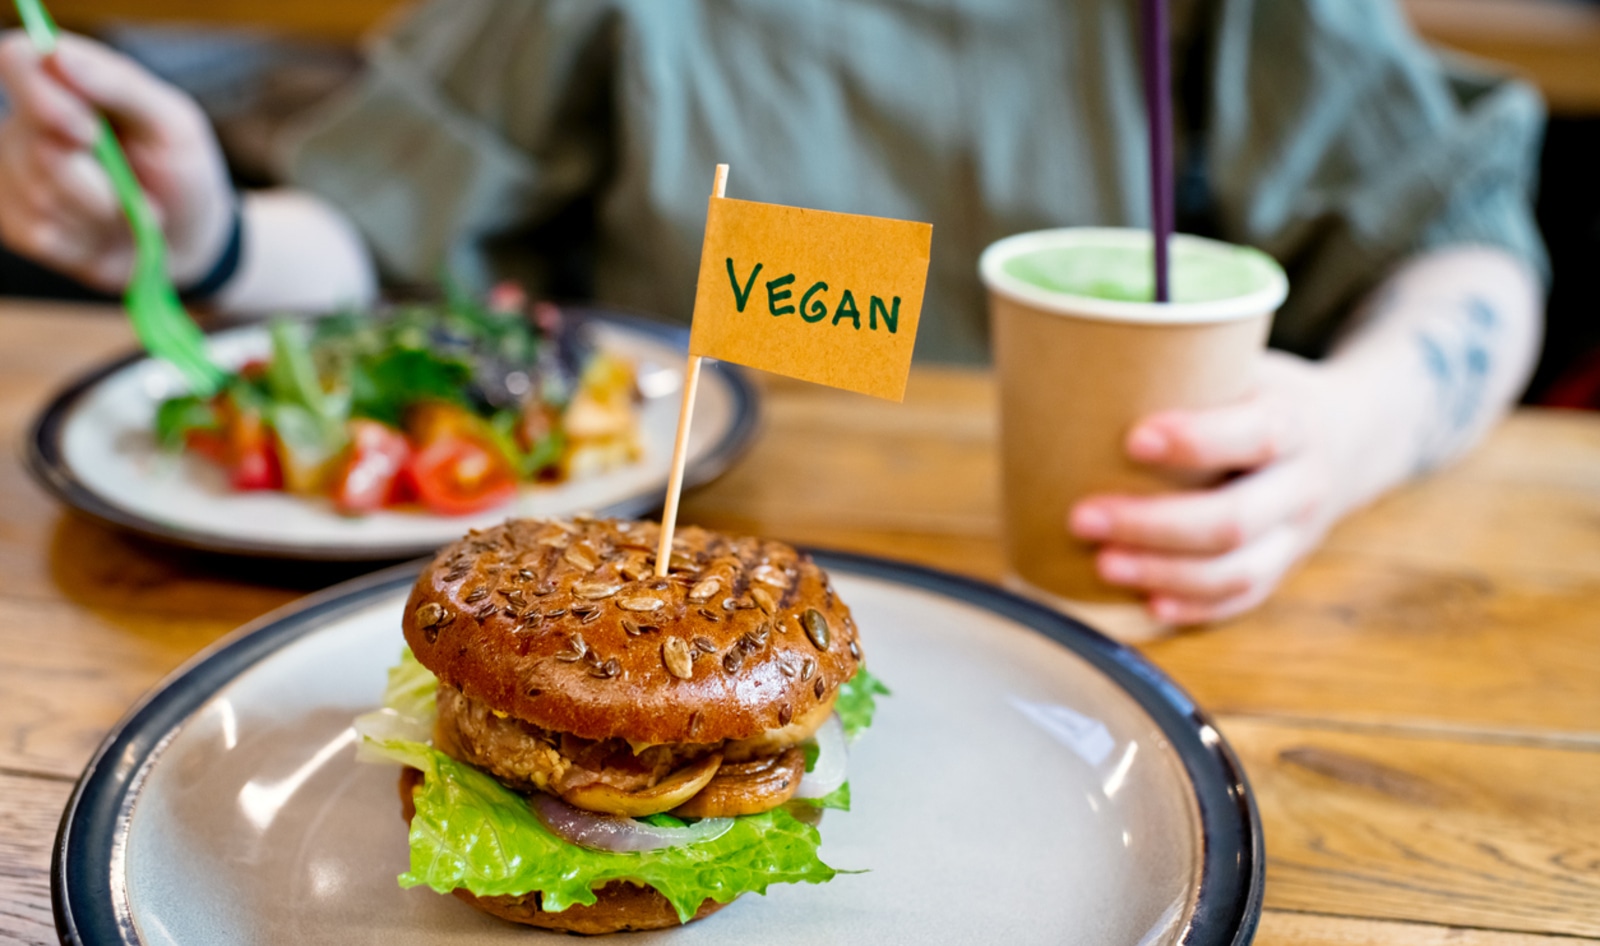 How Do You Actually Pronounce "Vegan?" Hint: Not Like Trump Does